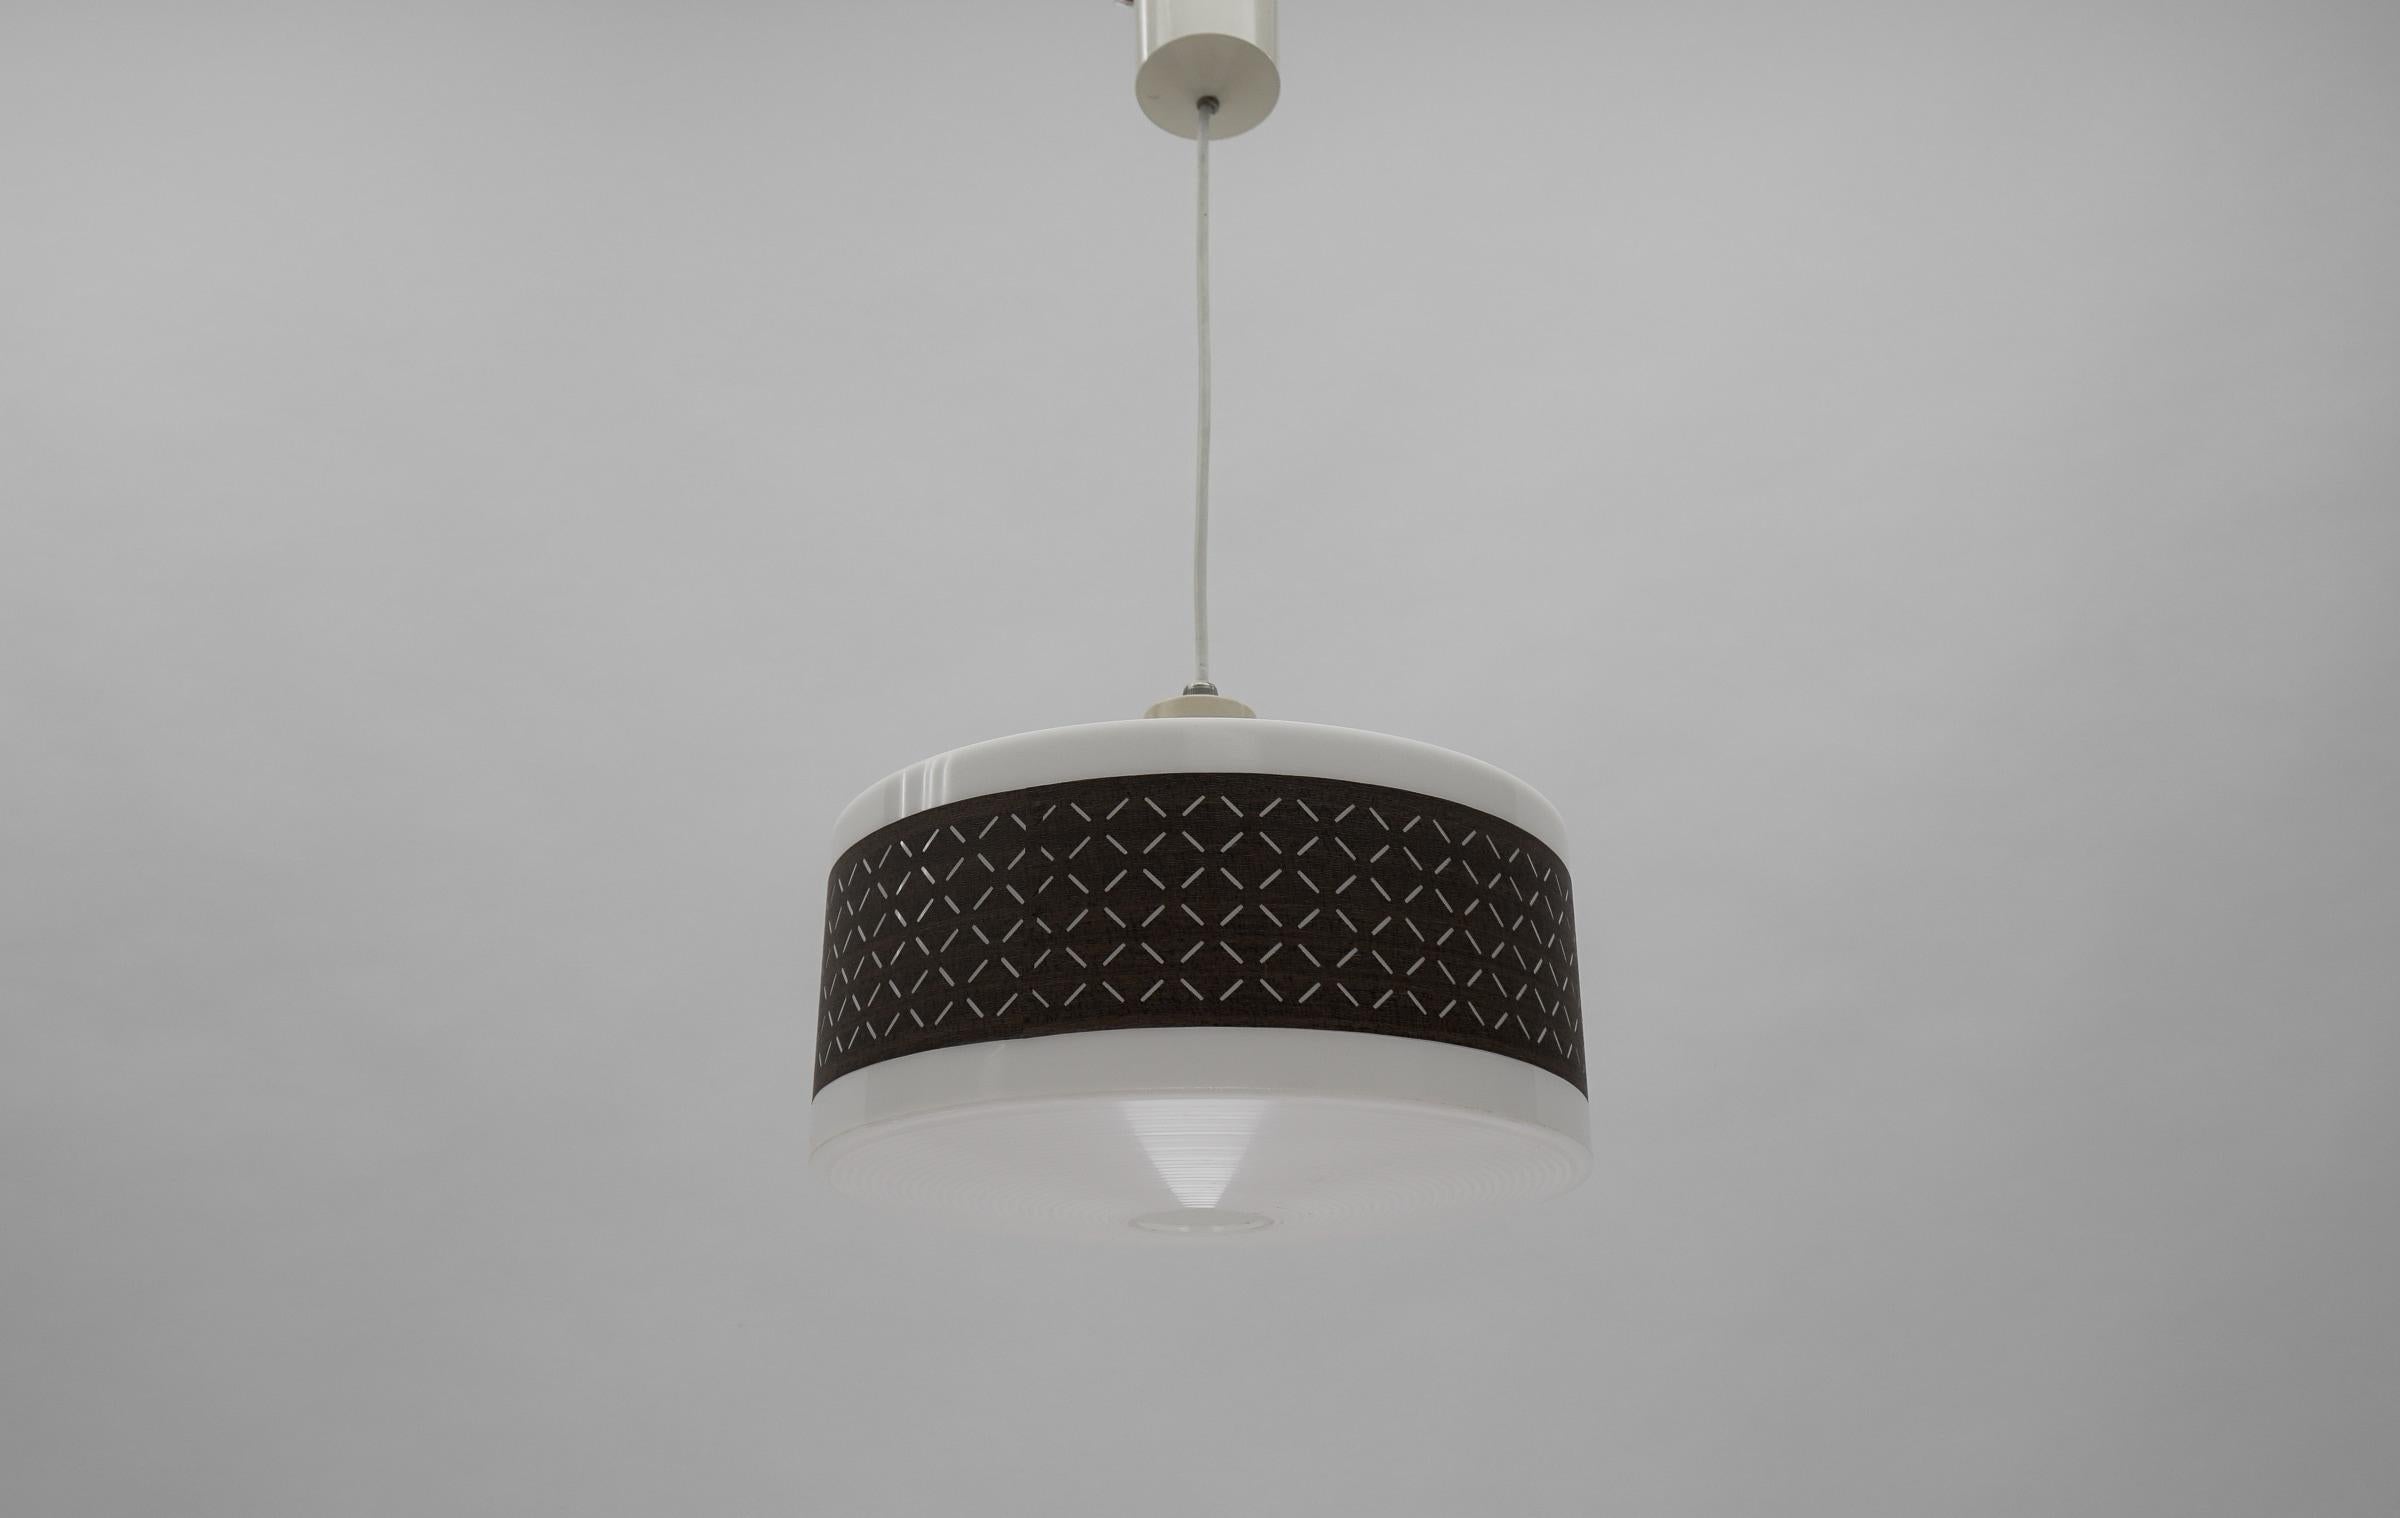 Ceiling lamp by Aloys F. Gangkofner for ERCO Leuchten, Germany Lüdenscheid 1960s.

A very interesting and decorative lamp. 

1 x E27 Edison screw fit bulb holder, is rewired and in working condition. It runs both on 110/230 Volt.